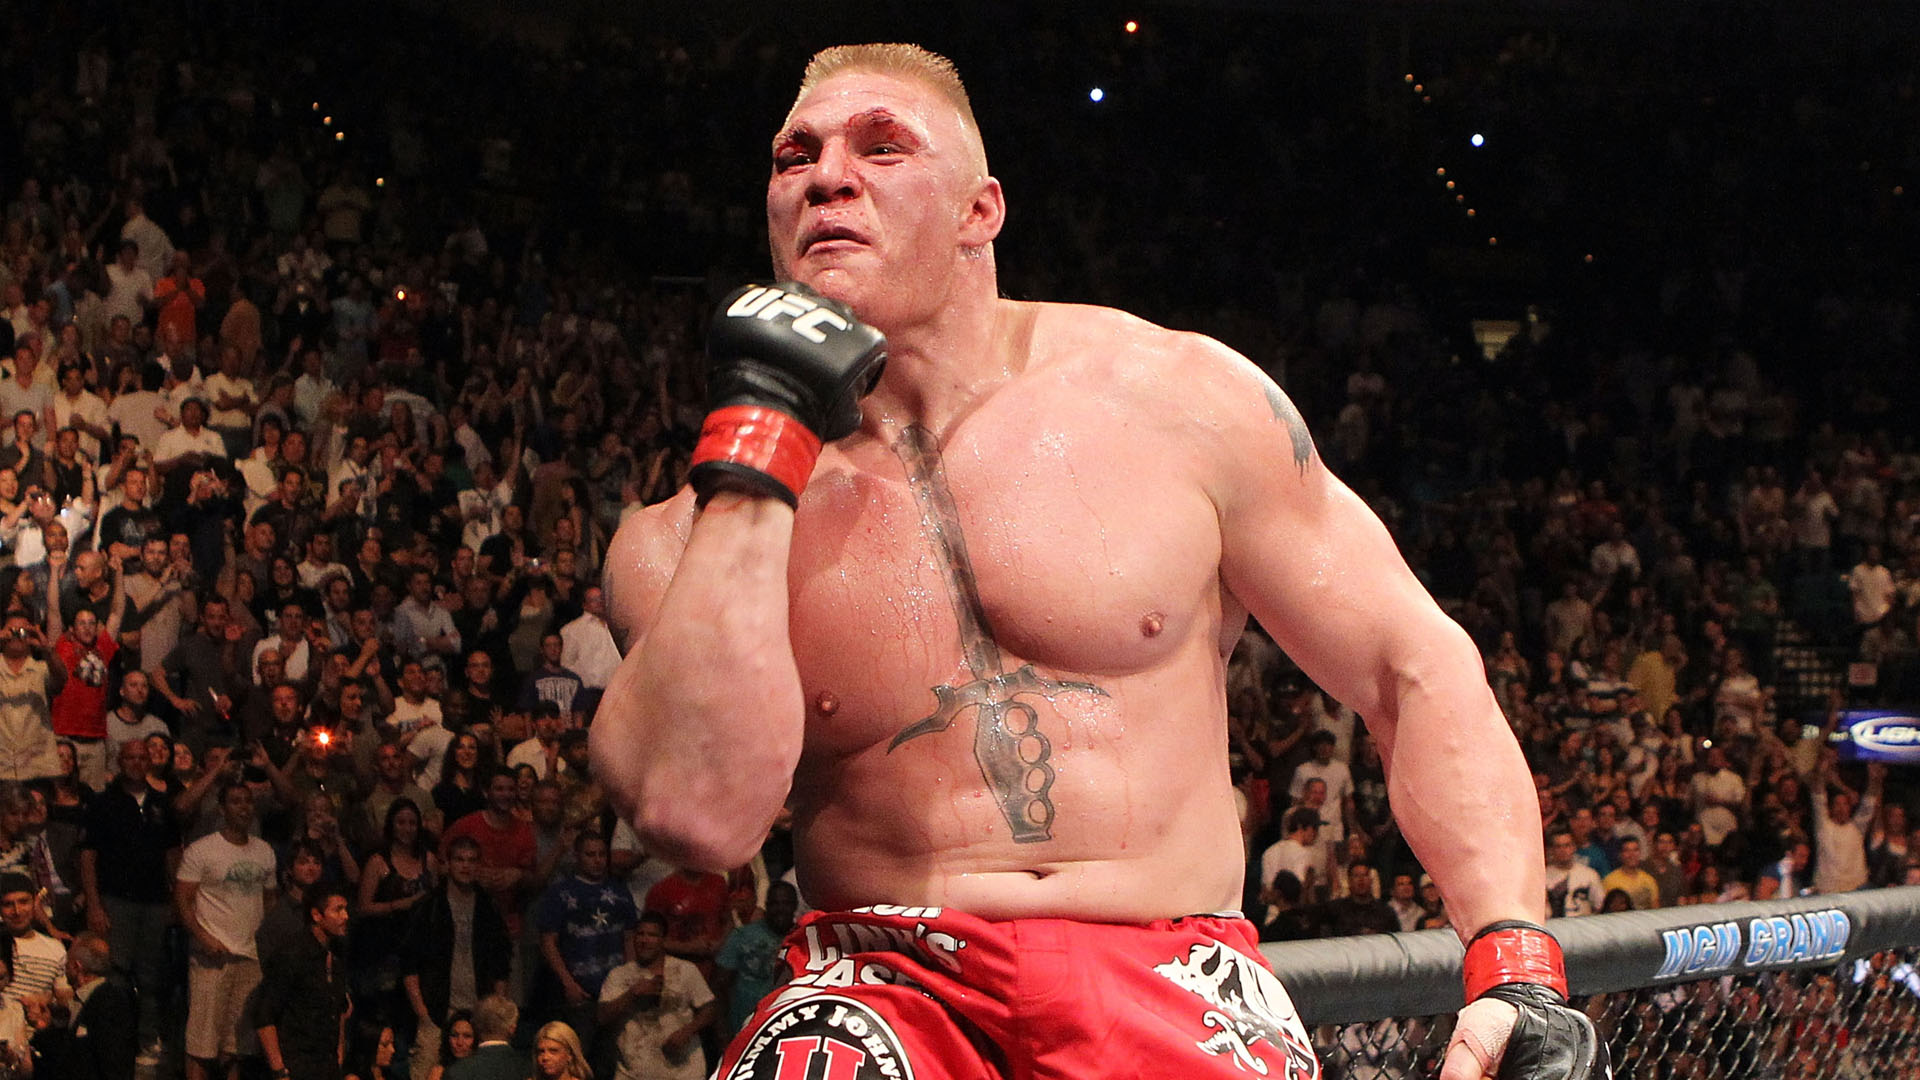 It's no secret that Brock Lesnar is a week away from his WWE contract expiring and despite reports that Lesnar would like to keep his cushy WWE gig, ...